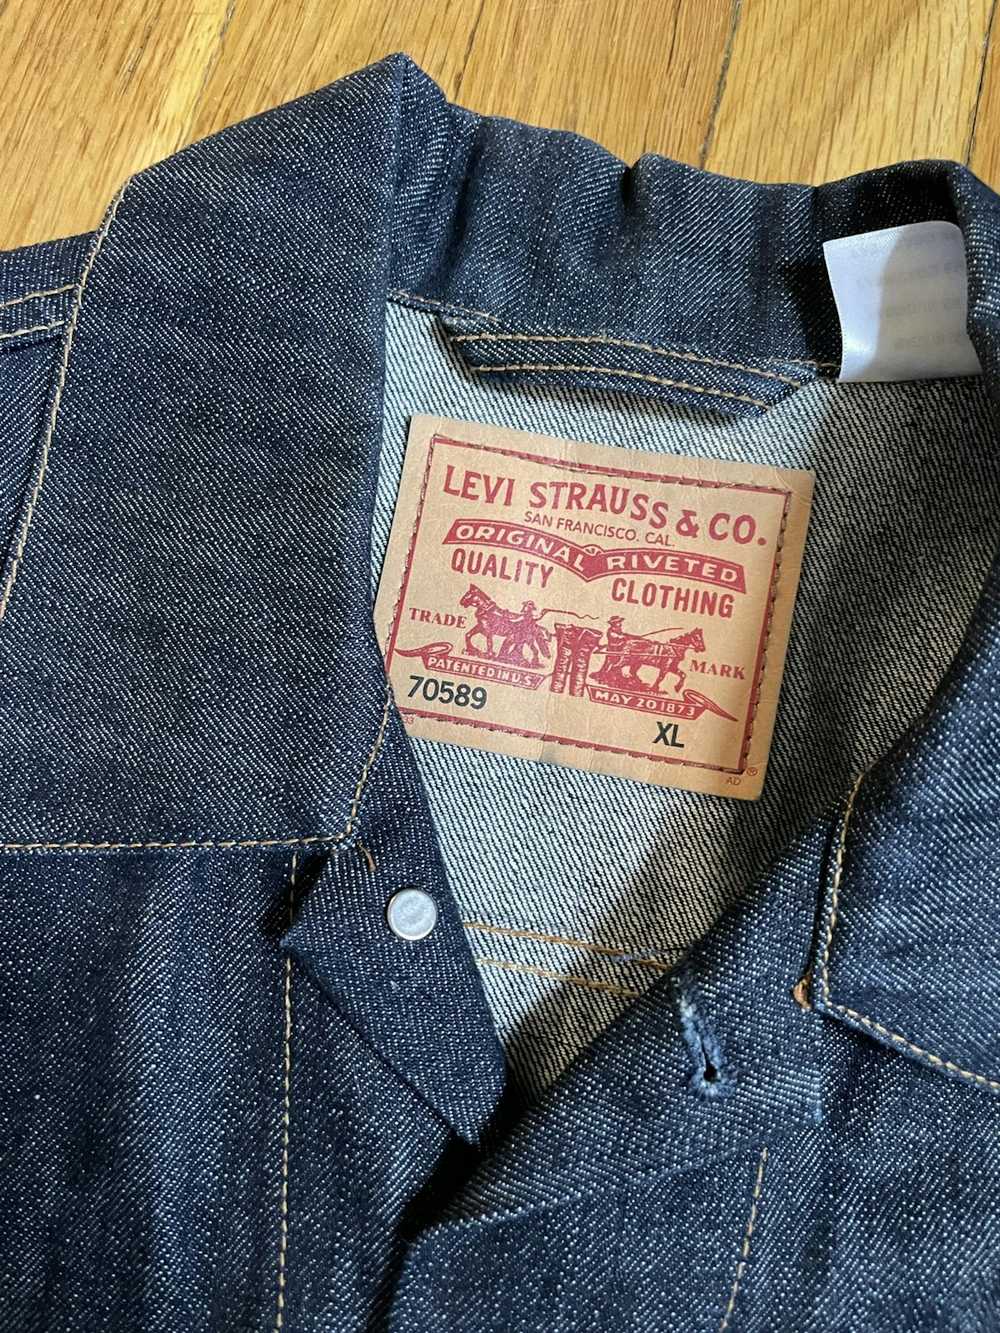 Levi's VERY RARE Andre x Levis Jacket 1/50 - image 3